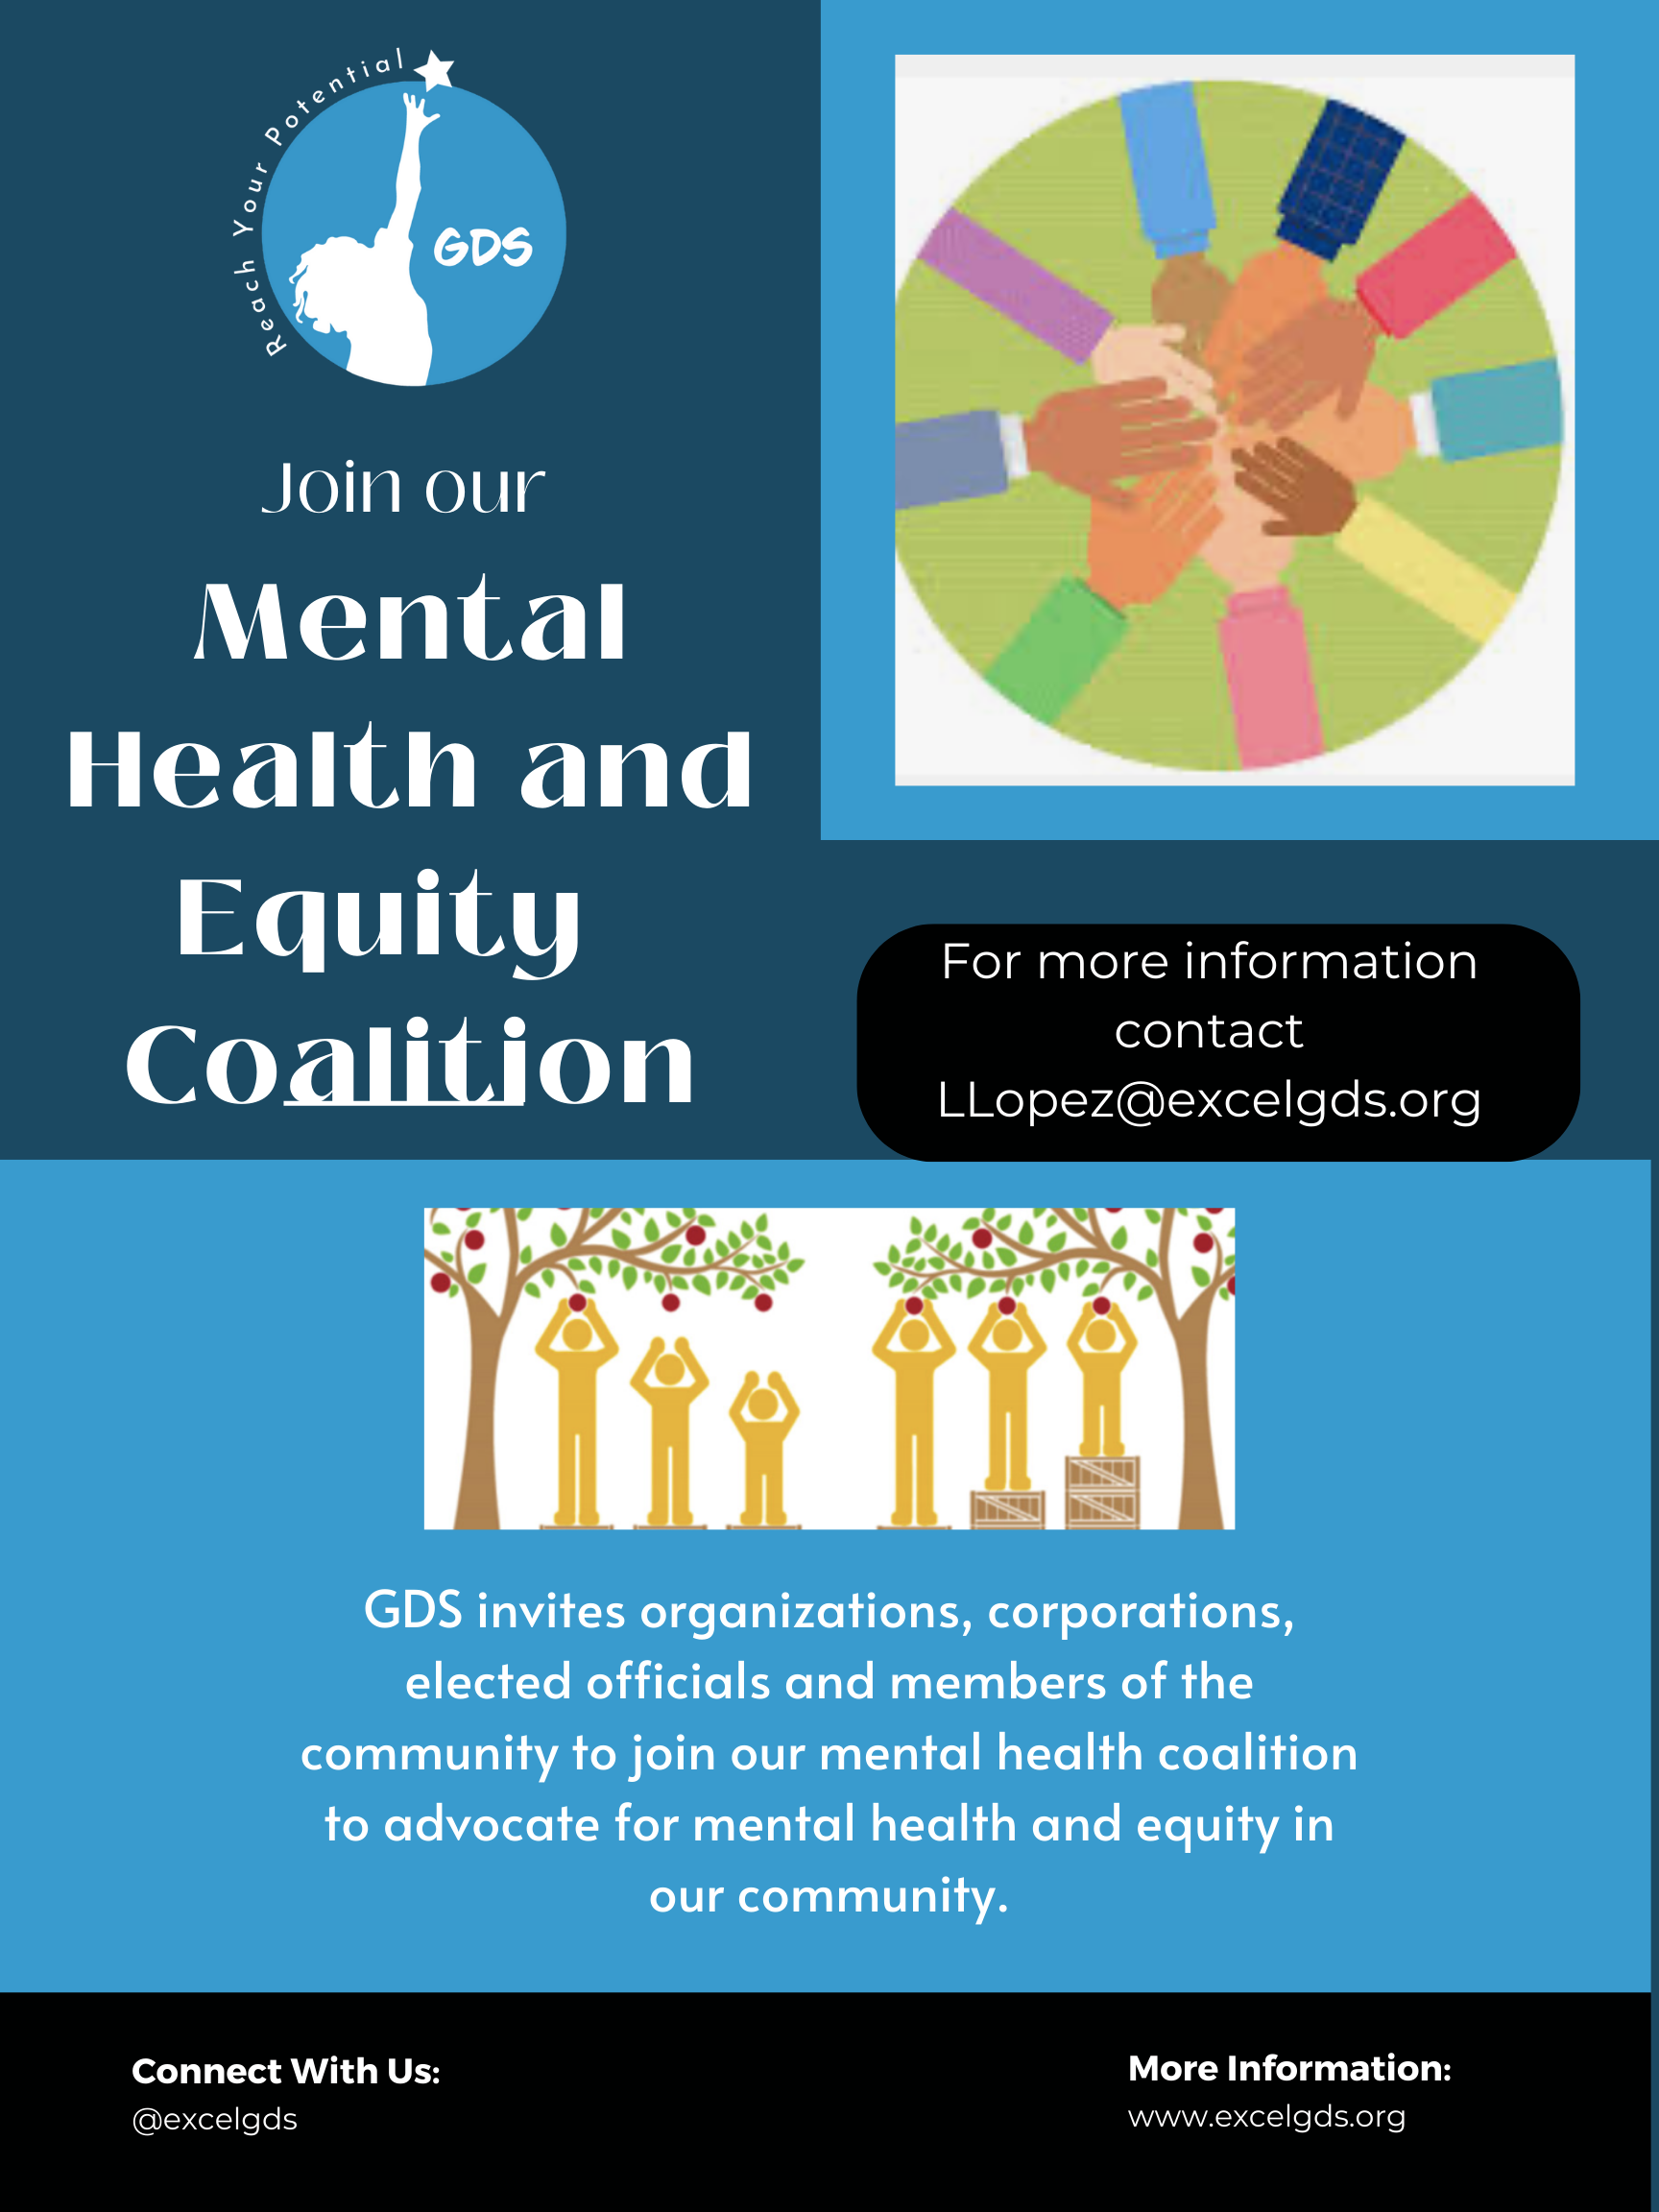 July is BIPOC Mental Health Awareness Month!